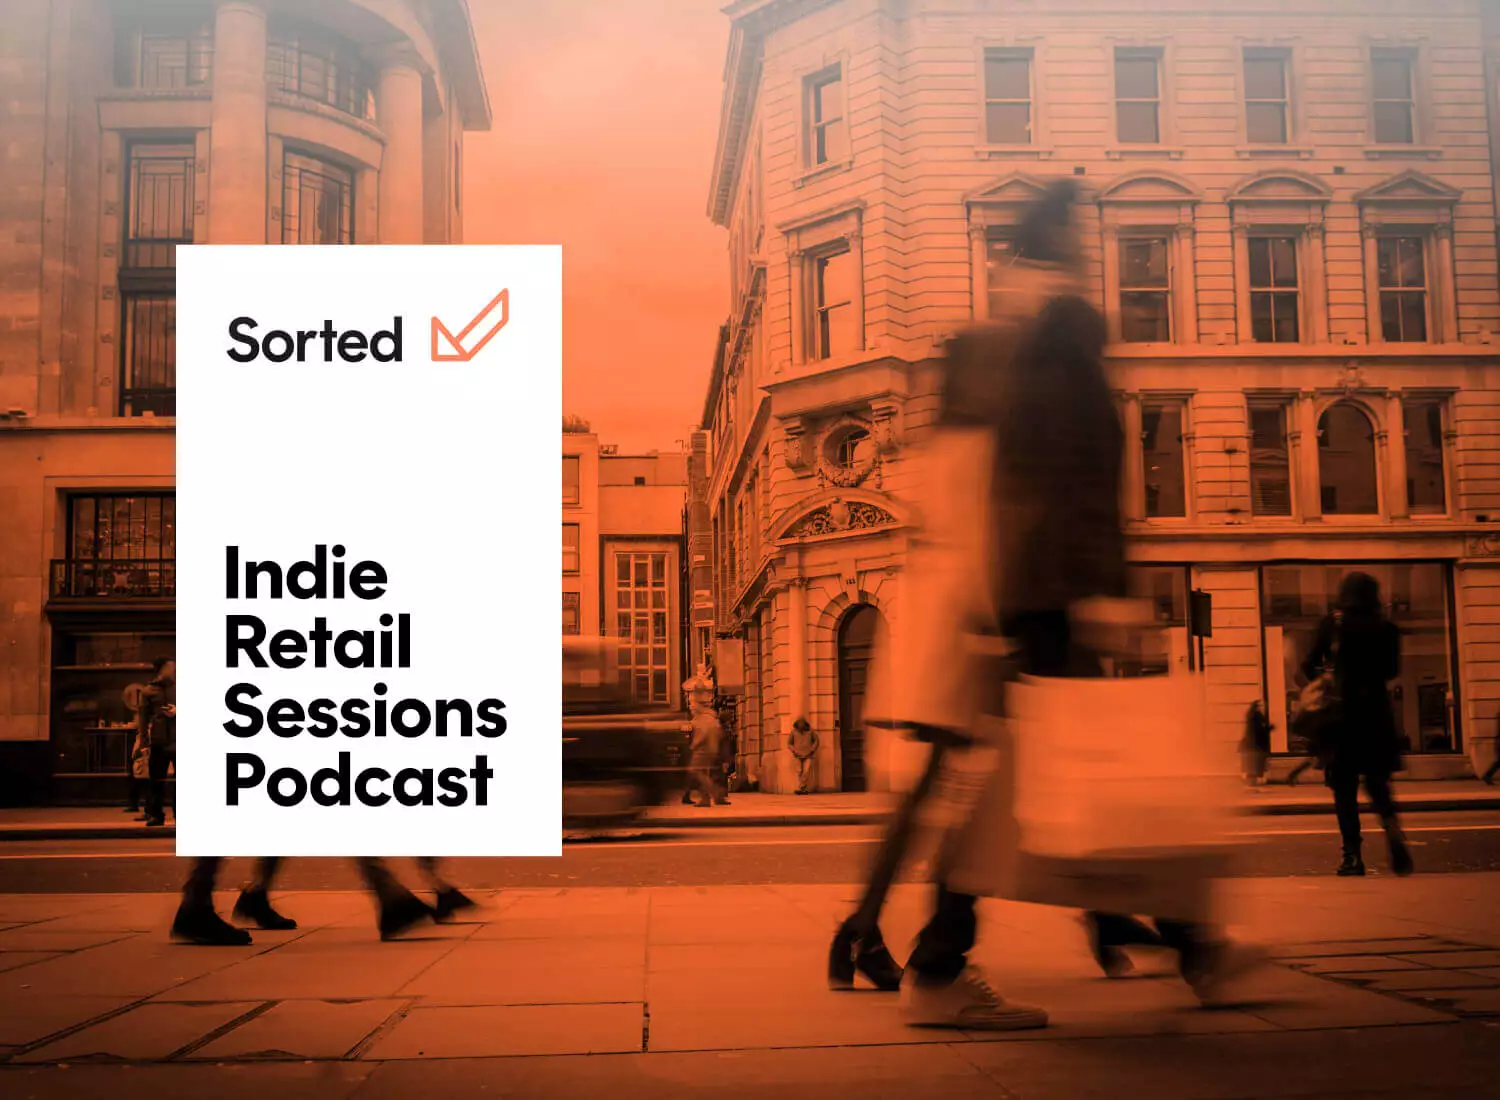 Sorted Indie Retail Sessions Podcast